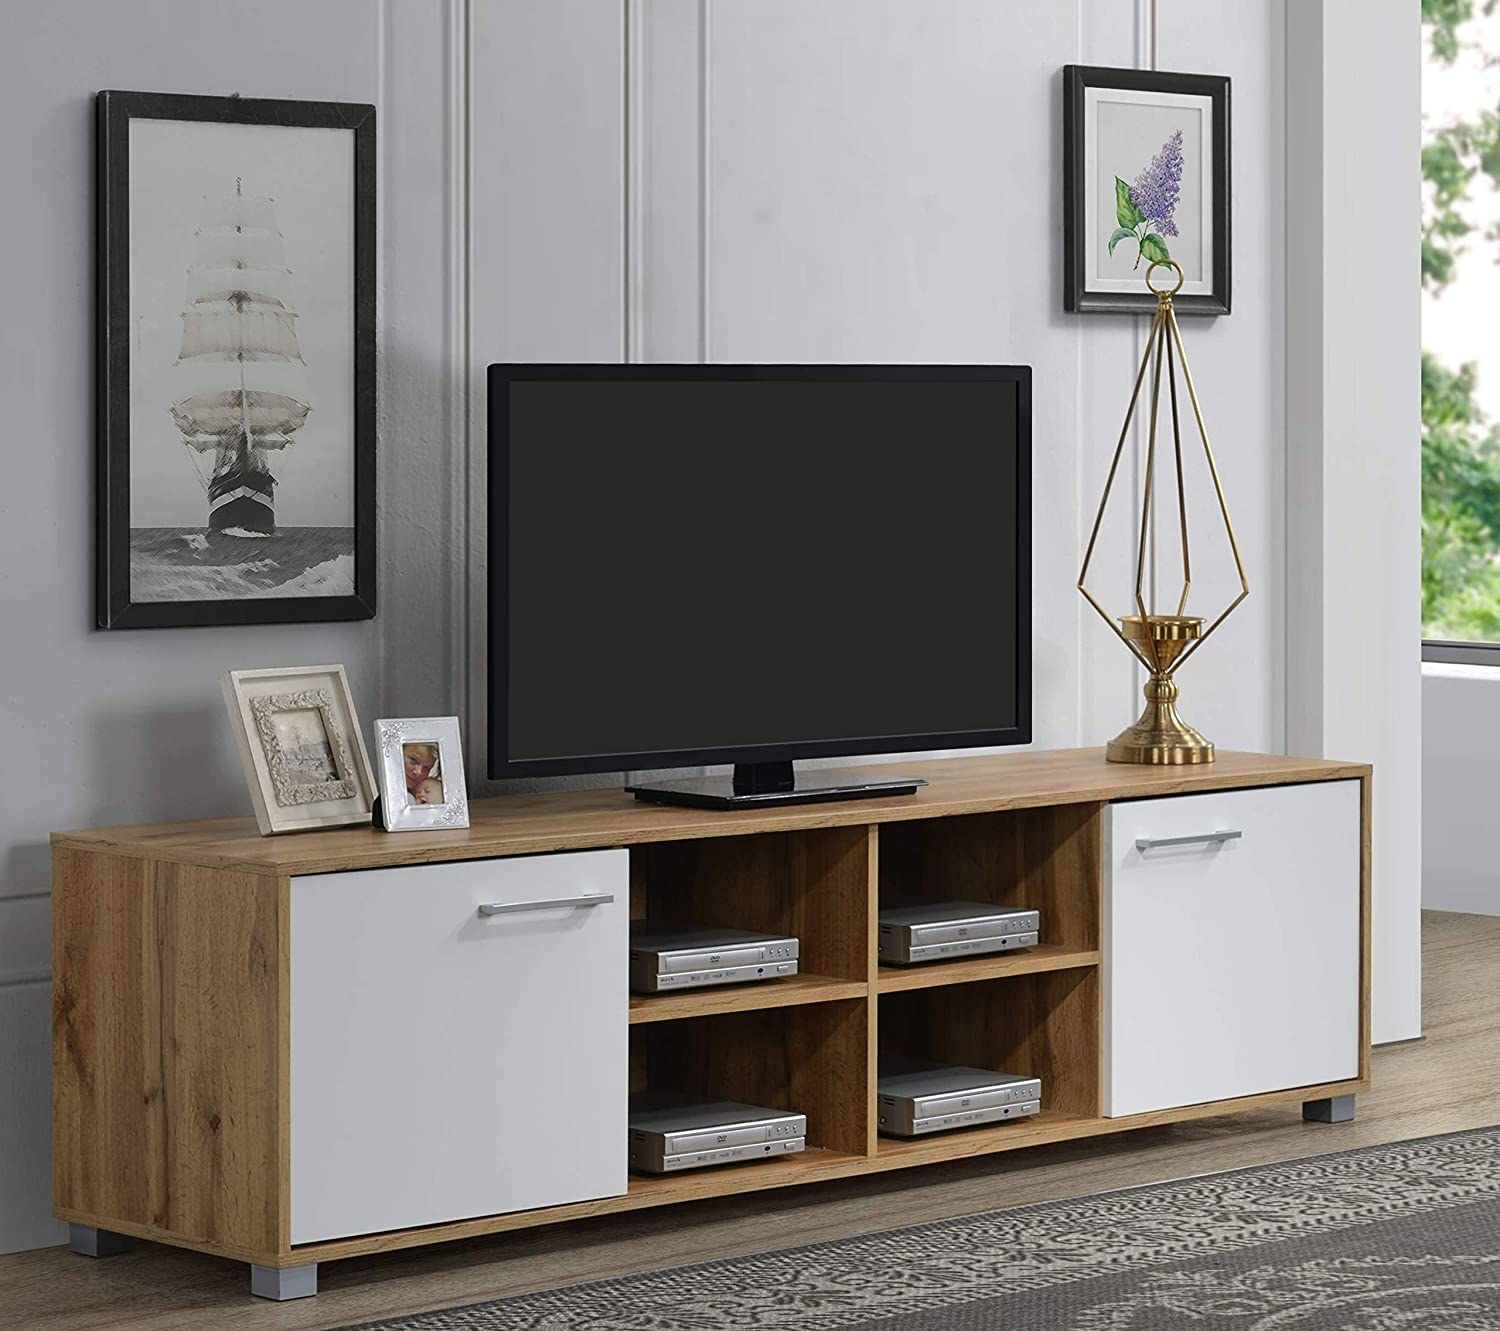 A TV unit with set top boxes, photos and a TV in it